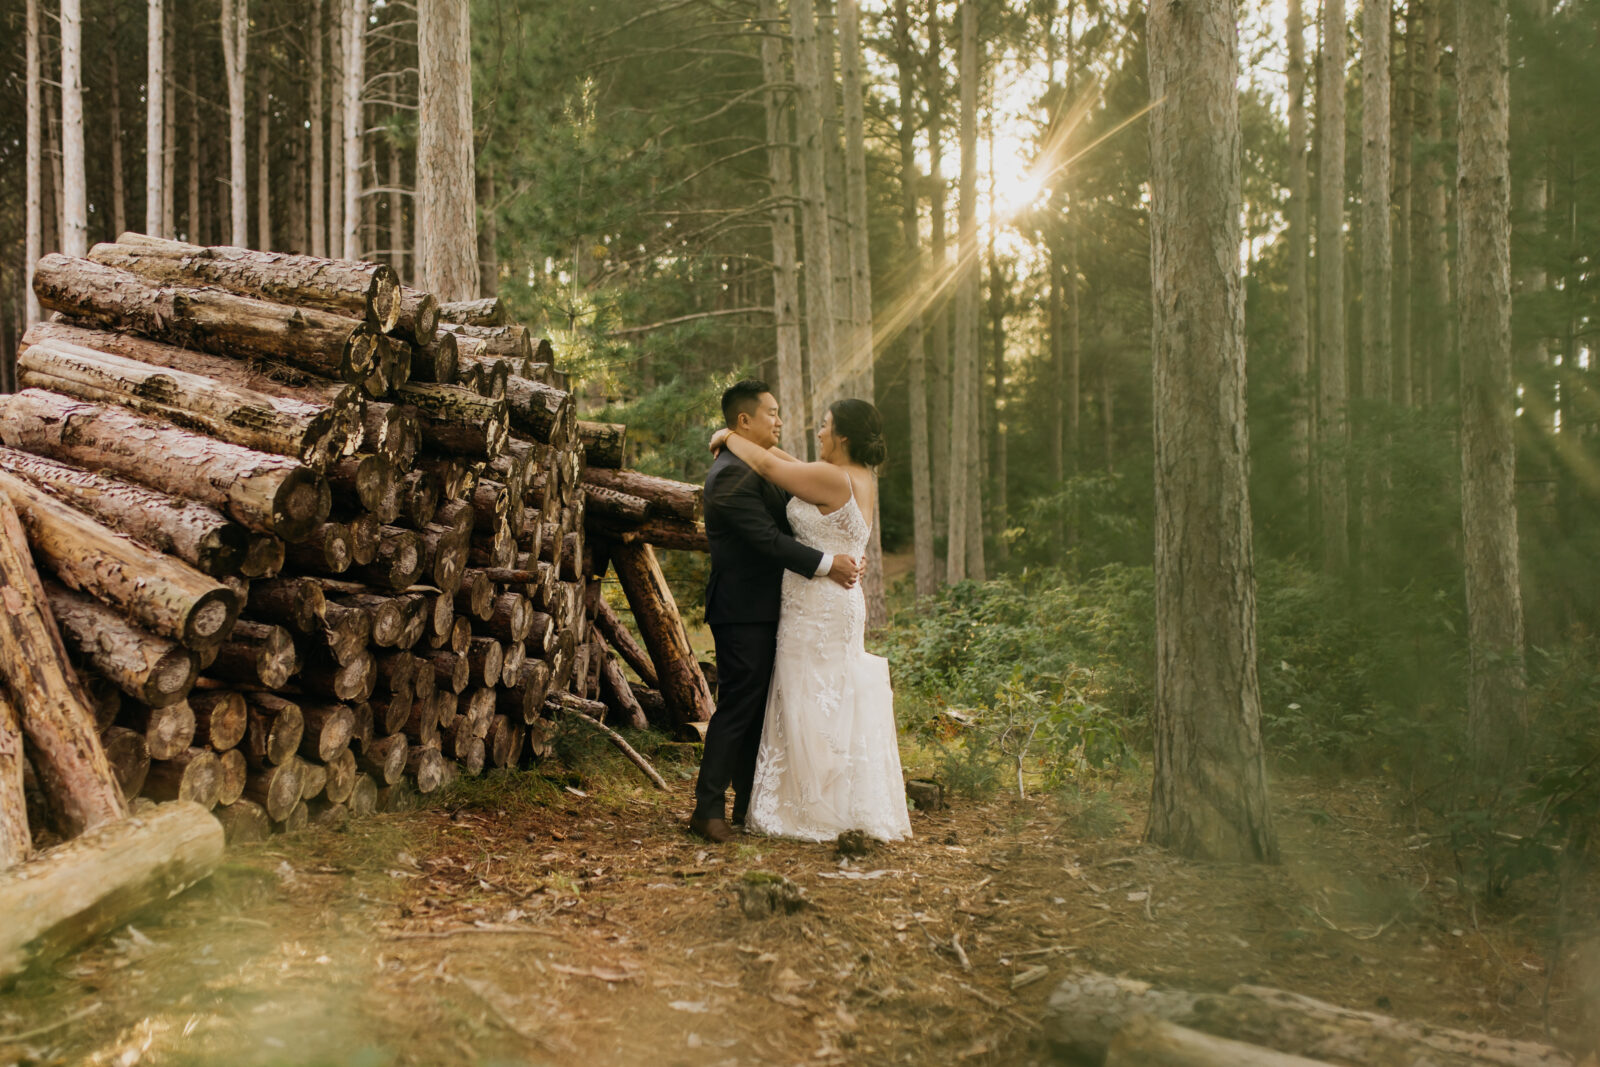 A lovely photo of the newlyweds in their Pinewood Wedding